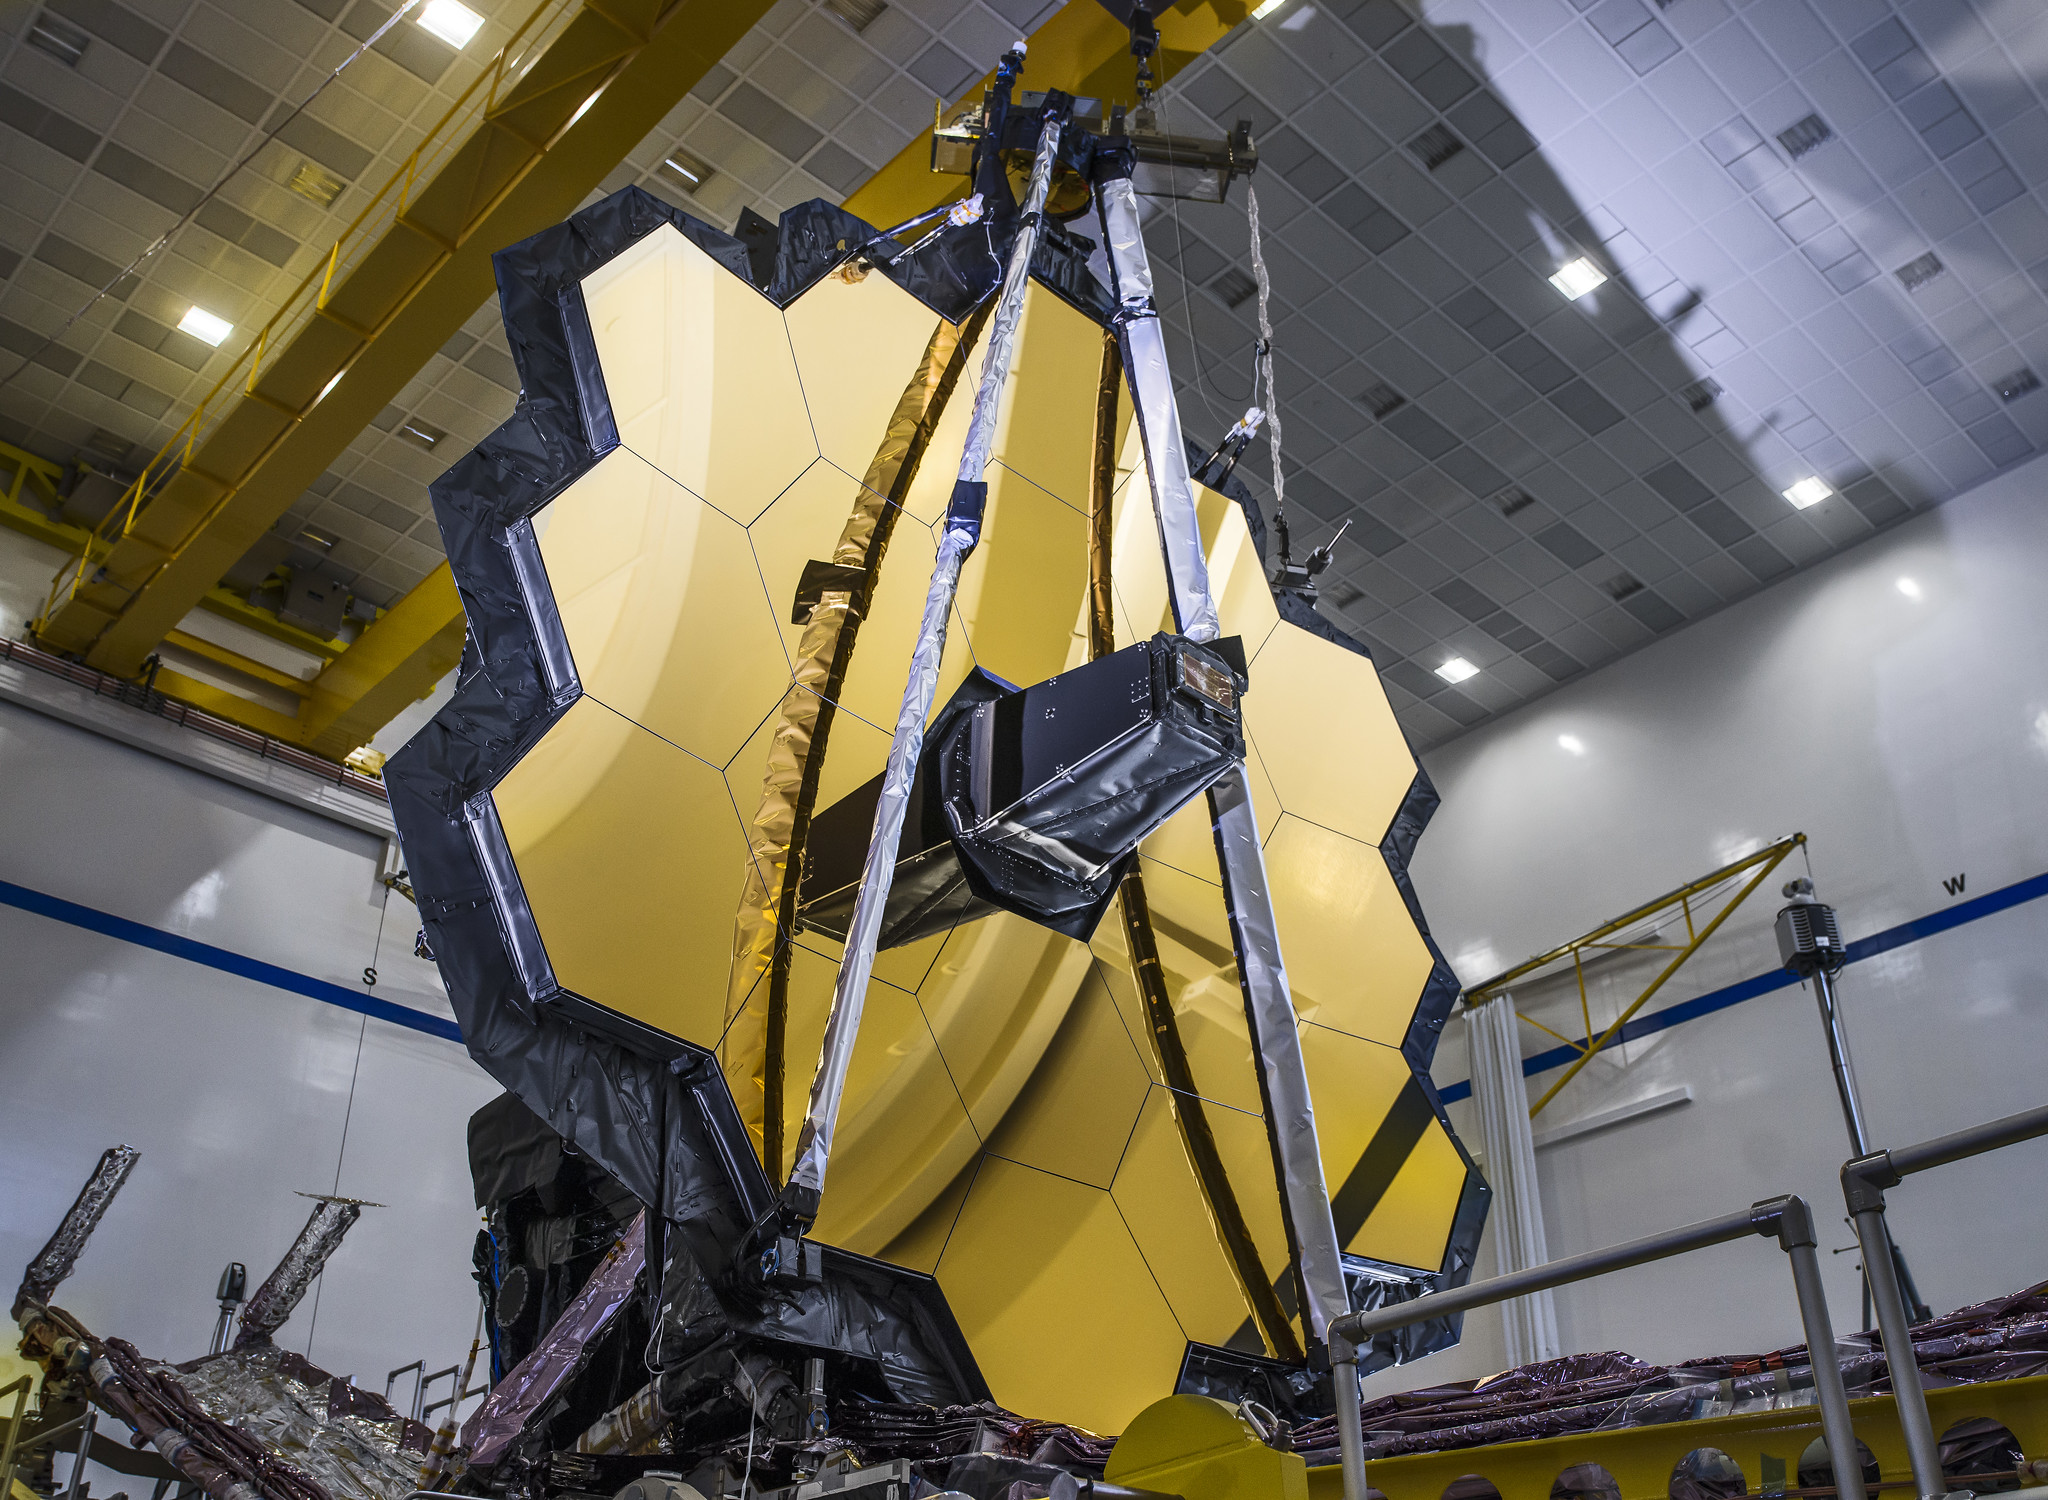 gold-hued hexagonal primary mirror of Webb telescope, photographed inside a clean room